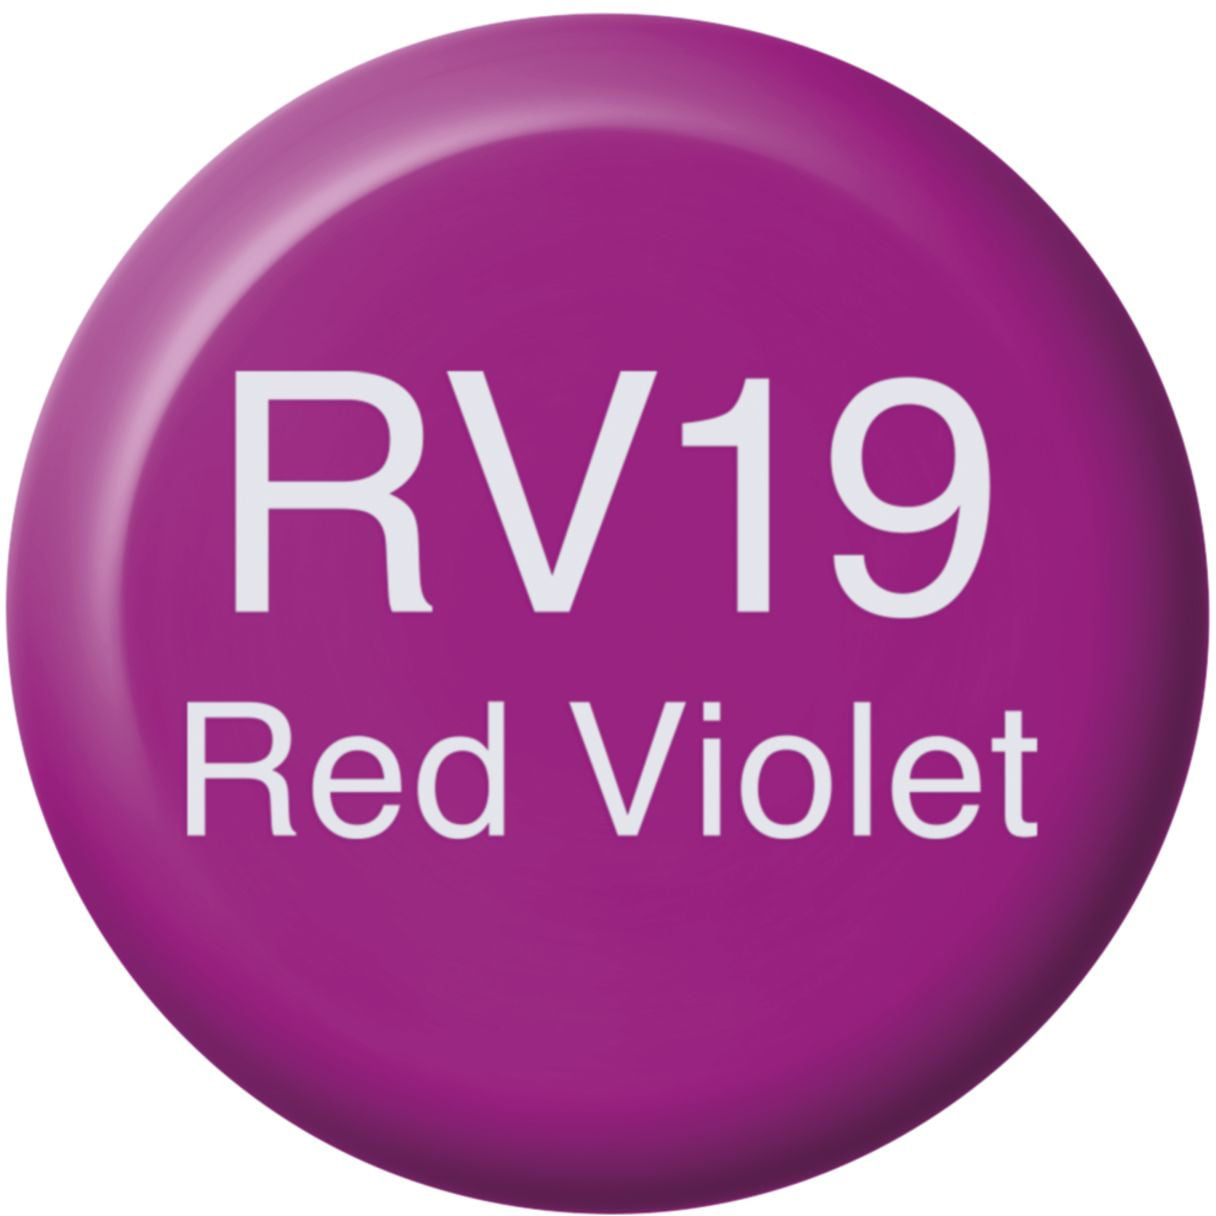 COPIC Ink Refill 2107639 RV19 - Red Violet RV19 - Red Violet